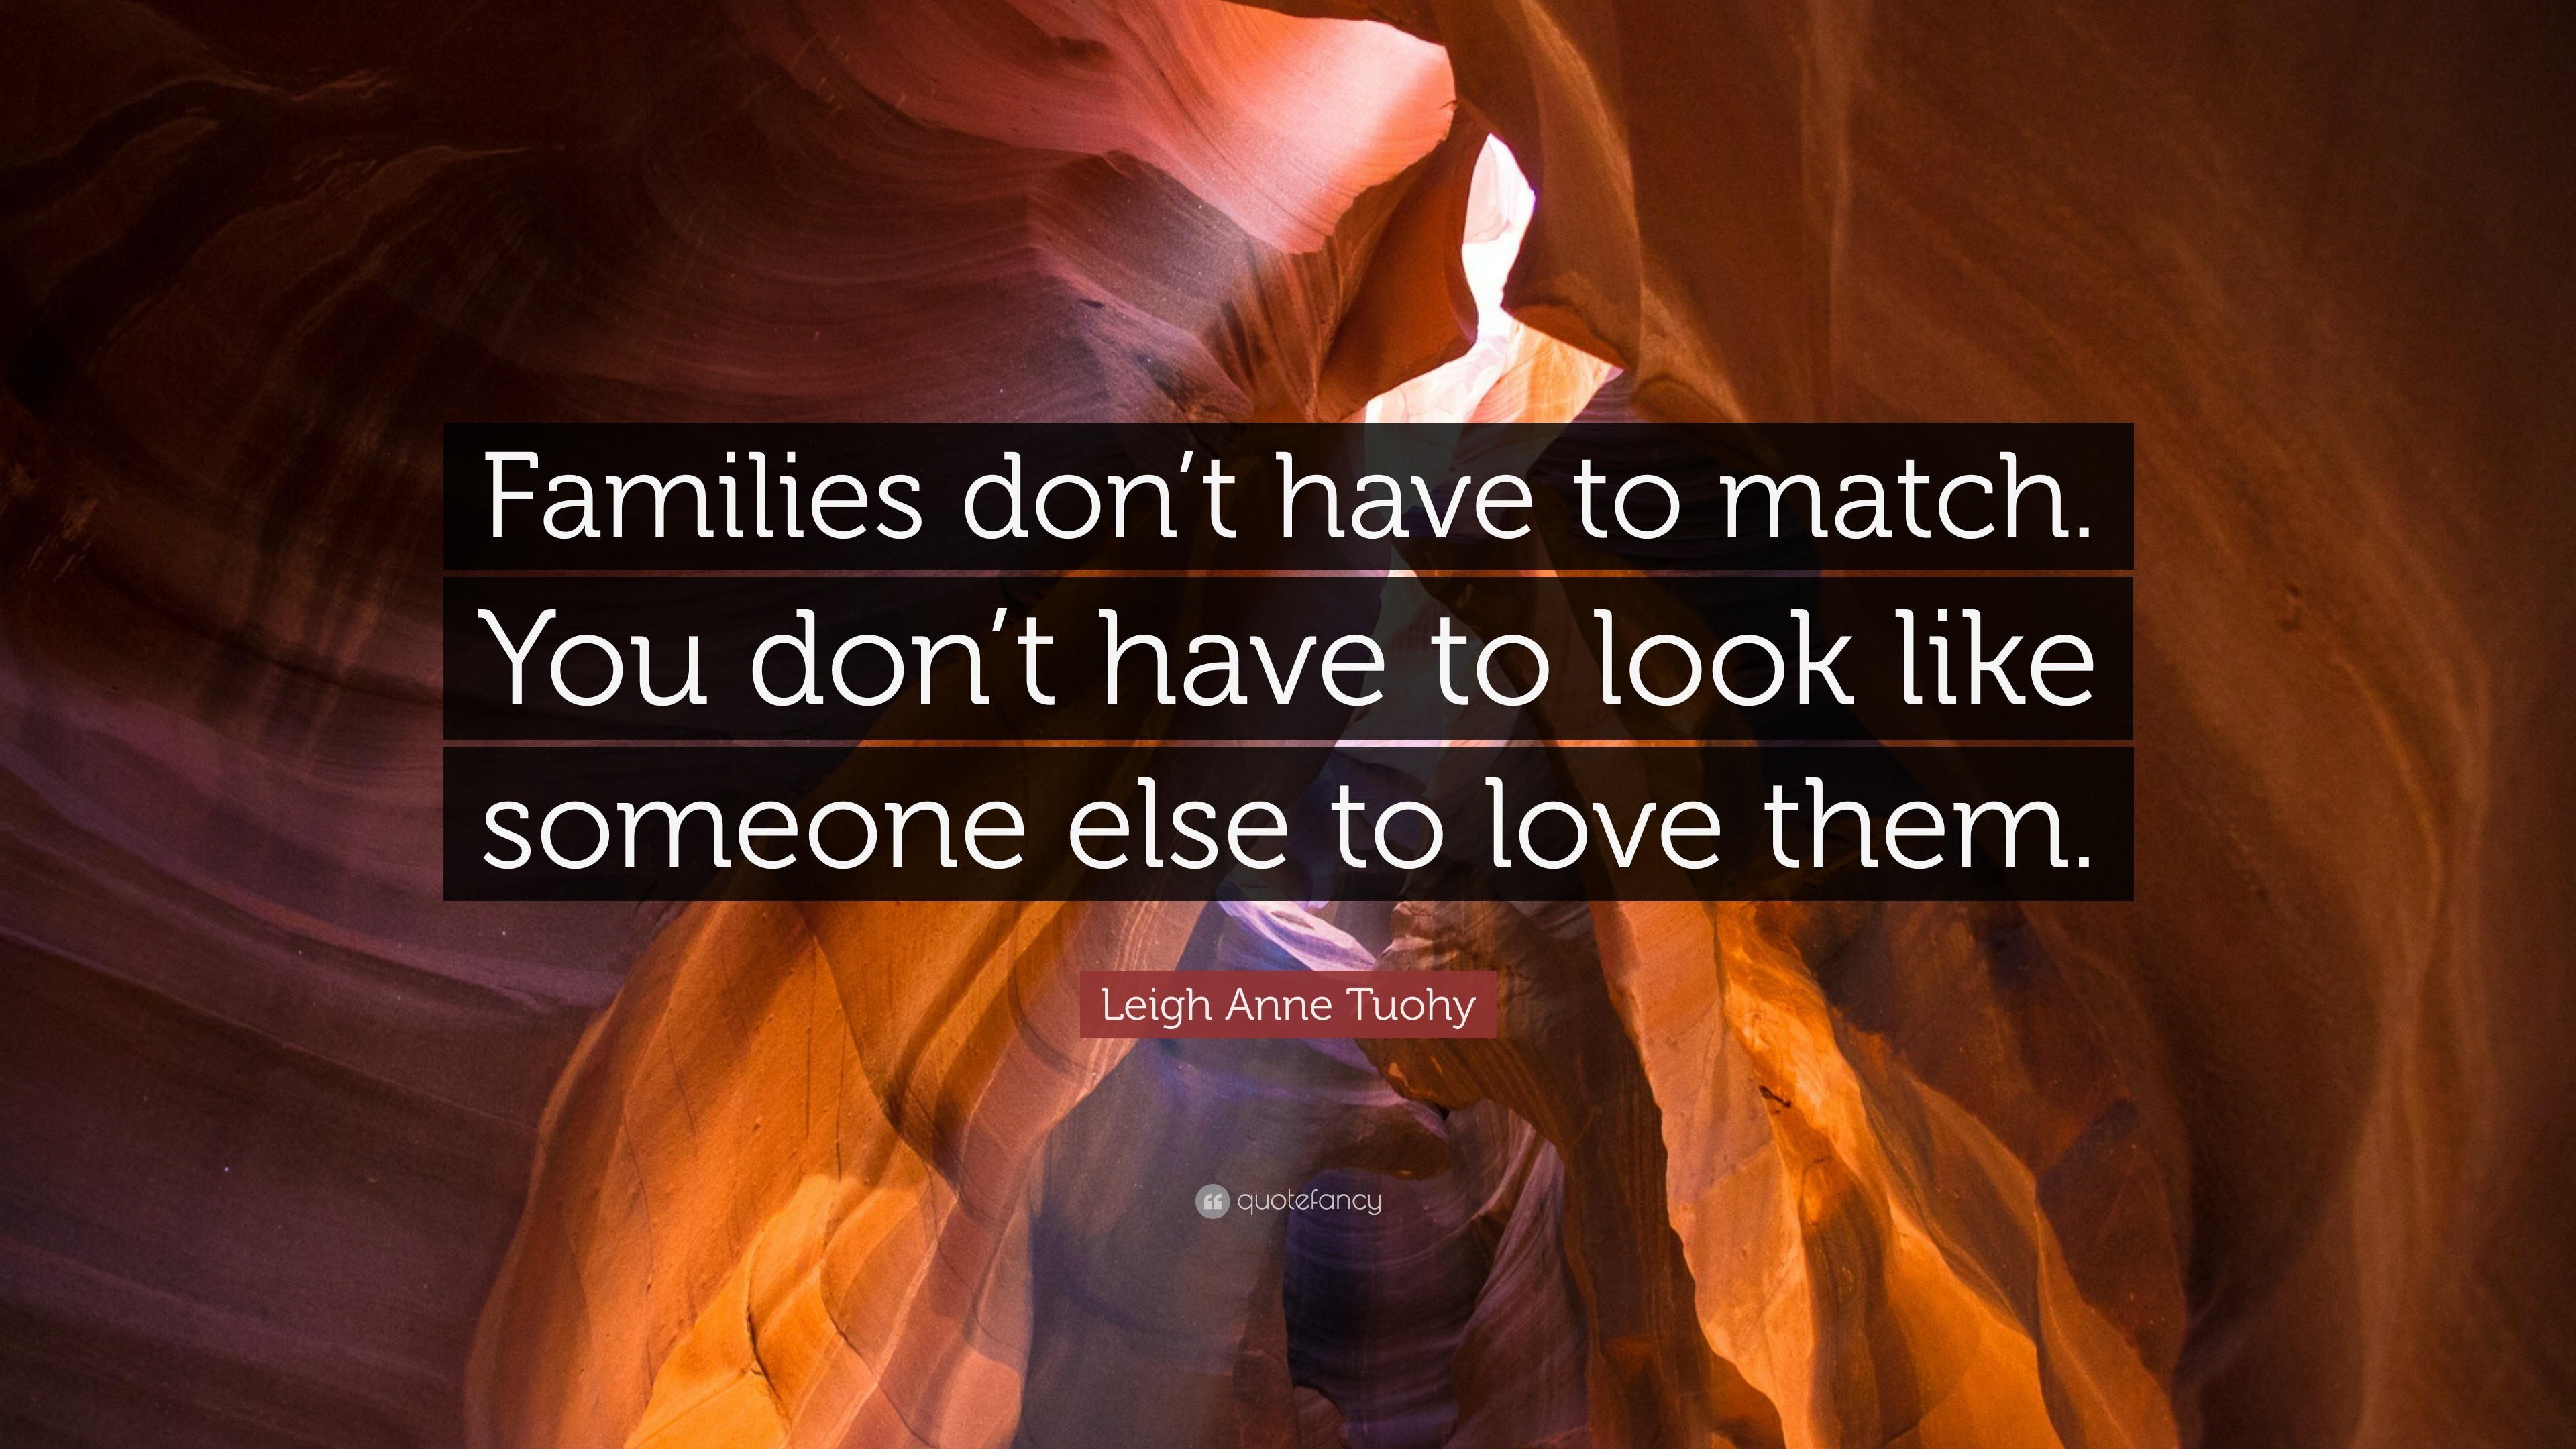 Leigh Anne Tuohy Quote: “Families don’t have to match. You don’t have ...